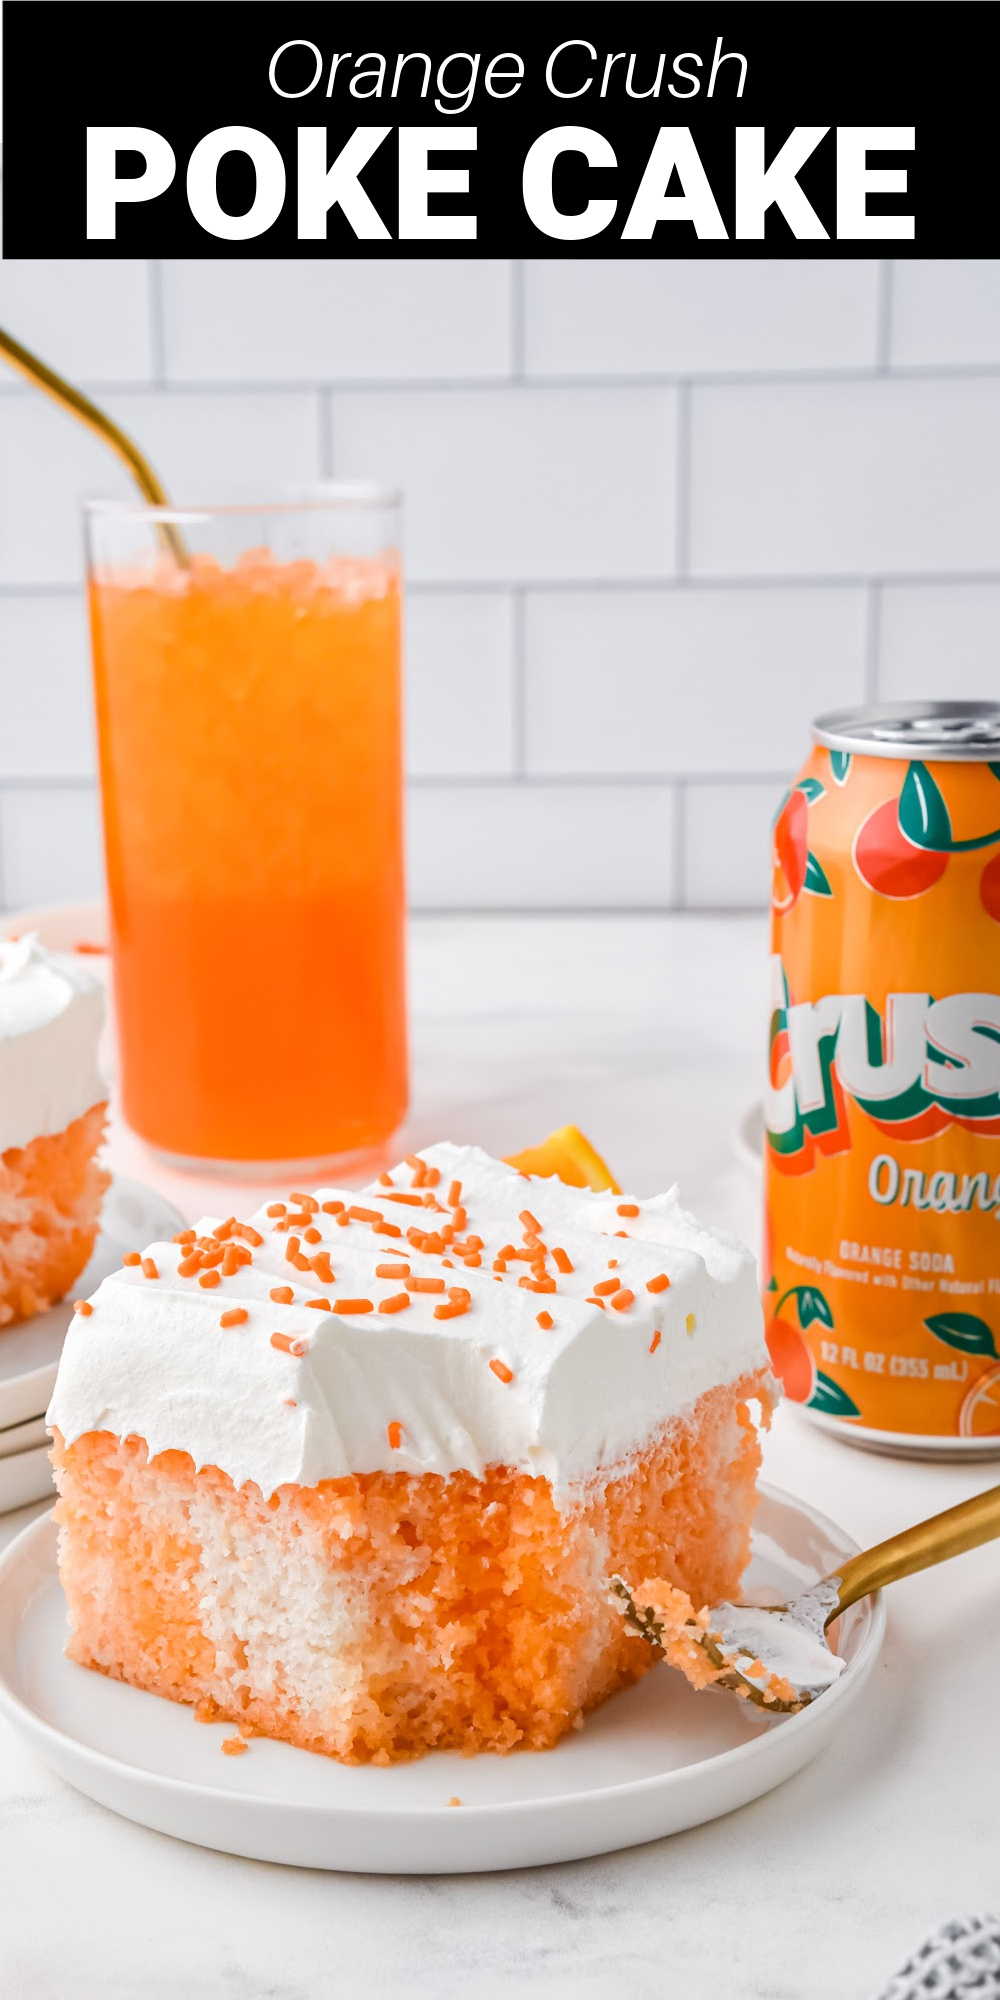 This Orange Crush Poke Cake is incredibly light, refreshing, and super easy to make! It’s a delicious, moist white cake that’s loaded with a scrumptious orange Jell-o filling in every bite. It’s topped with a fluffy whipped cream topping and decorated with pretty orange sprinkles or fresh fruit, making it the ideal summer dessert.